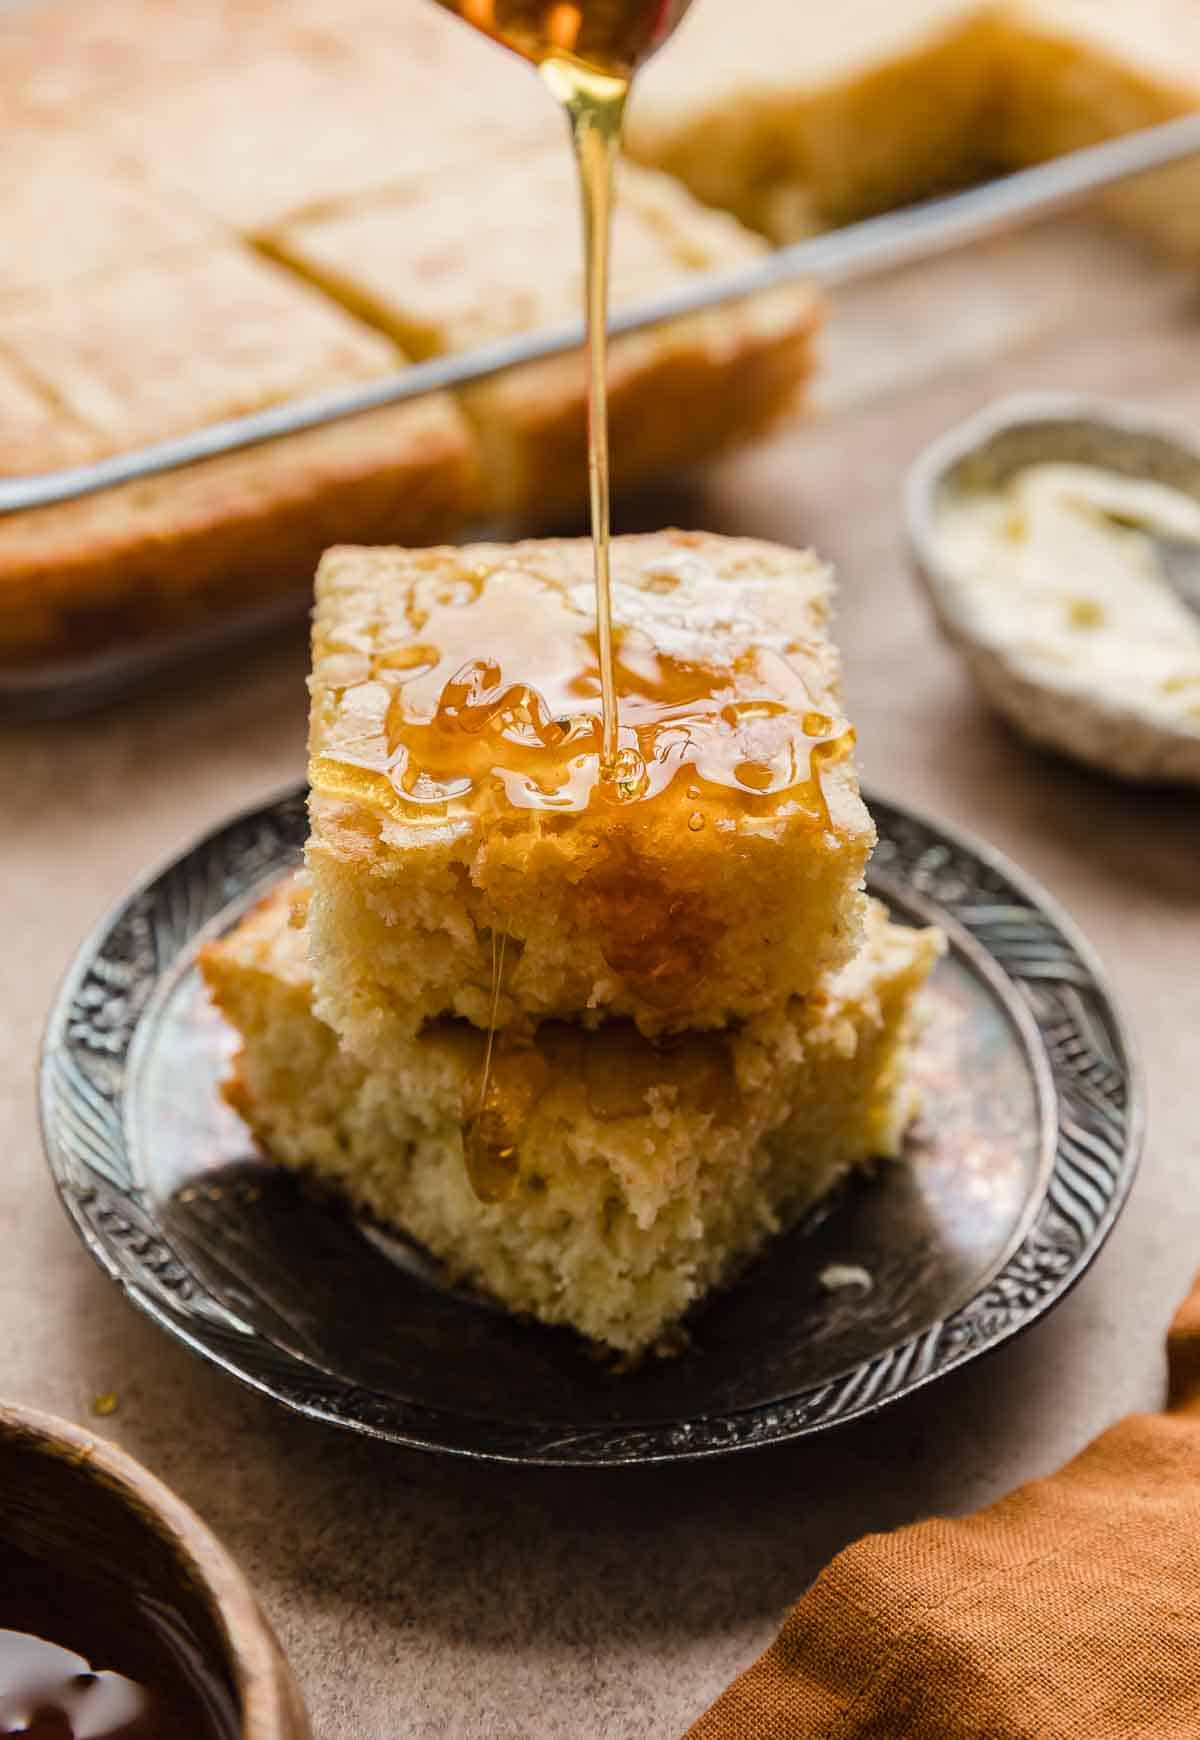 Honey being drizzled over two square slices of Bisquick Cornbread that are sitting on a tarnished plate.